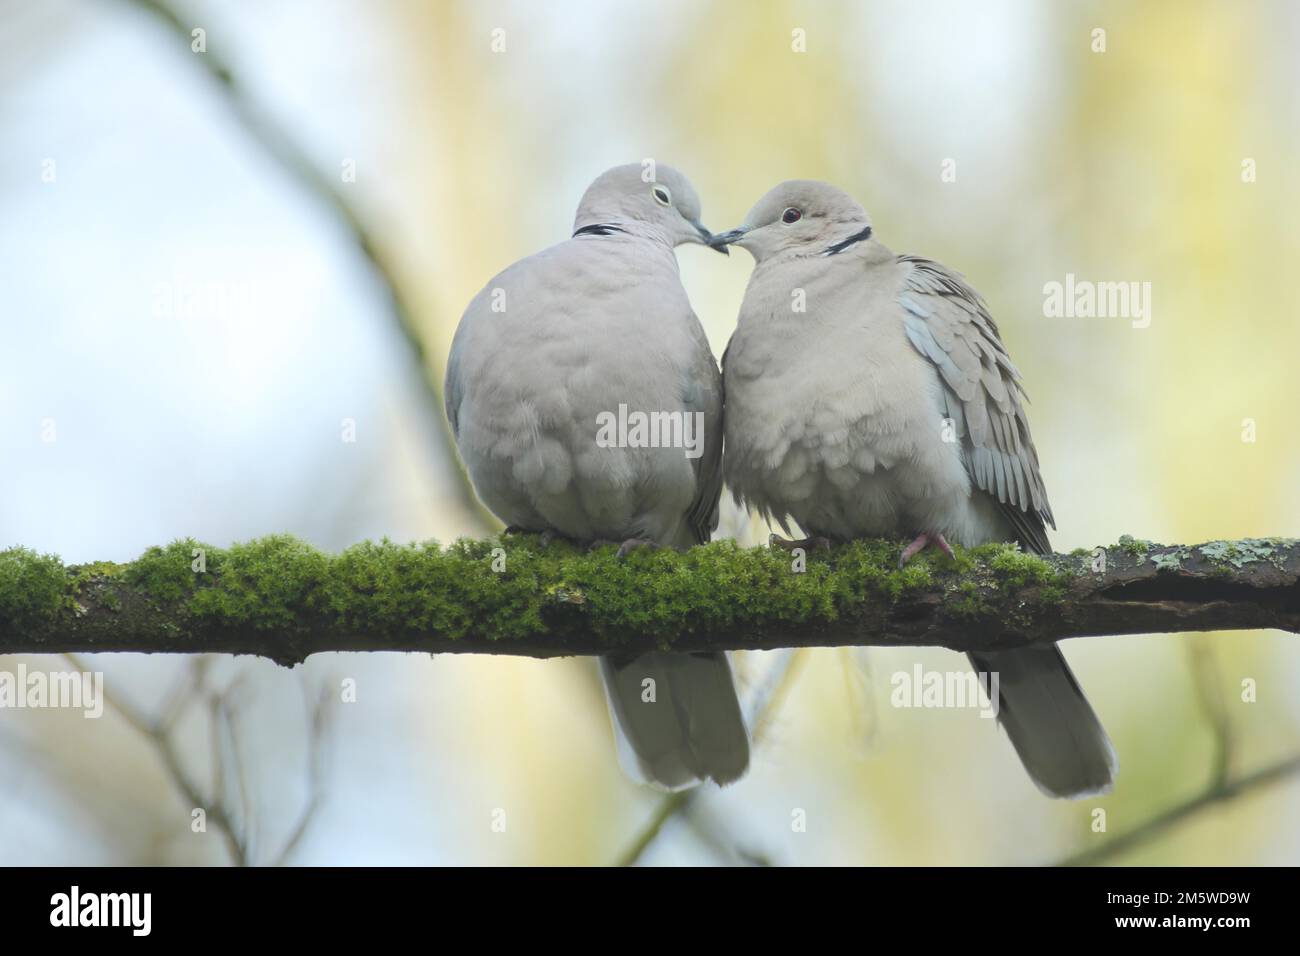 A pair of eurasian collared dove (Streptopelia decaocto) during courtship in love play, emotion, cuddling, cuddling, affection, closeness Stock Photo